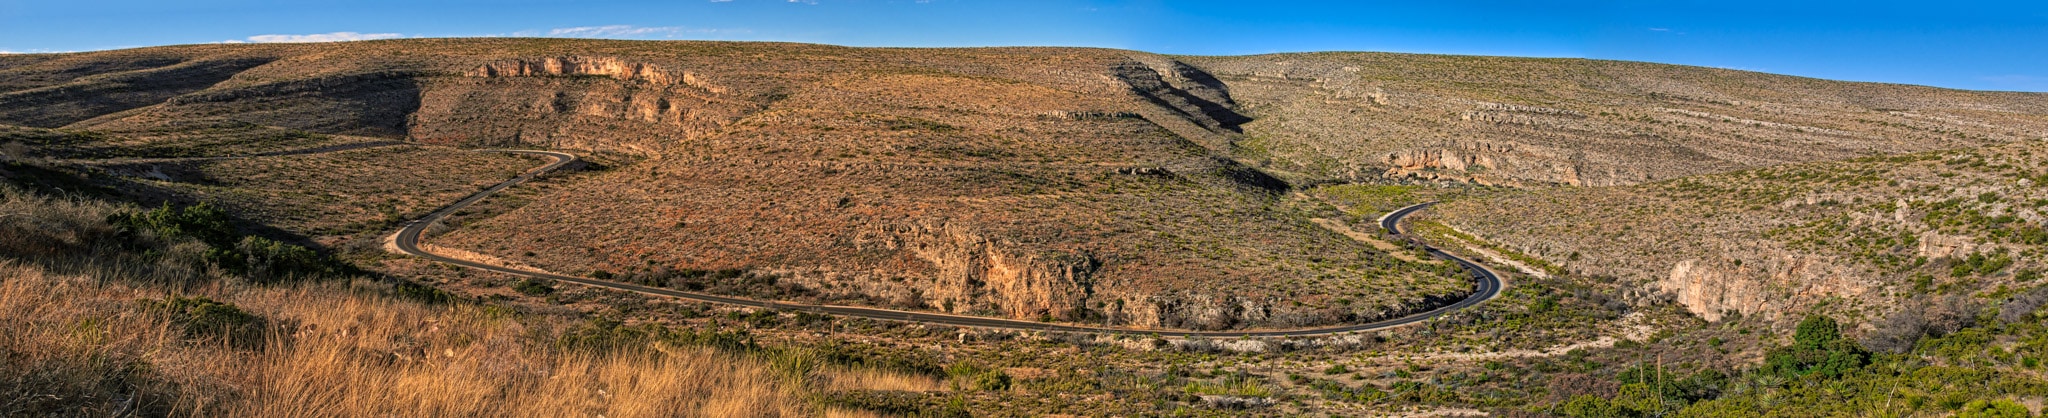 This curvy road takes visitors throughout the main part of the Carlsbad National Park near Carlsbad, New Mexico.